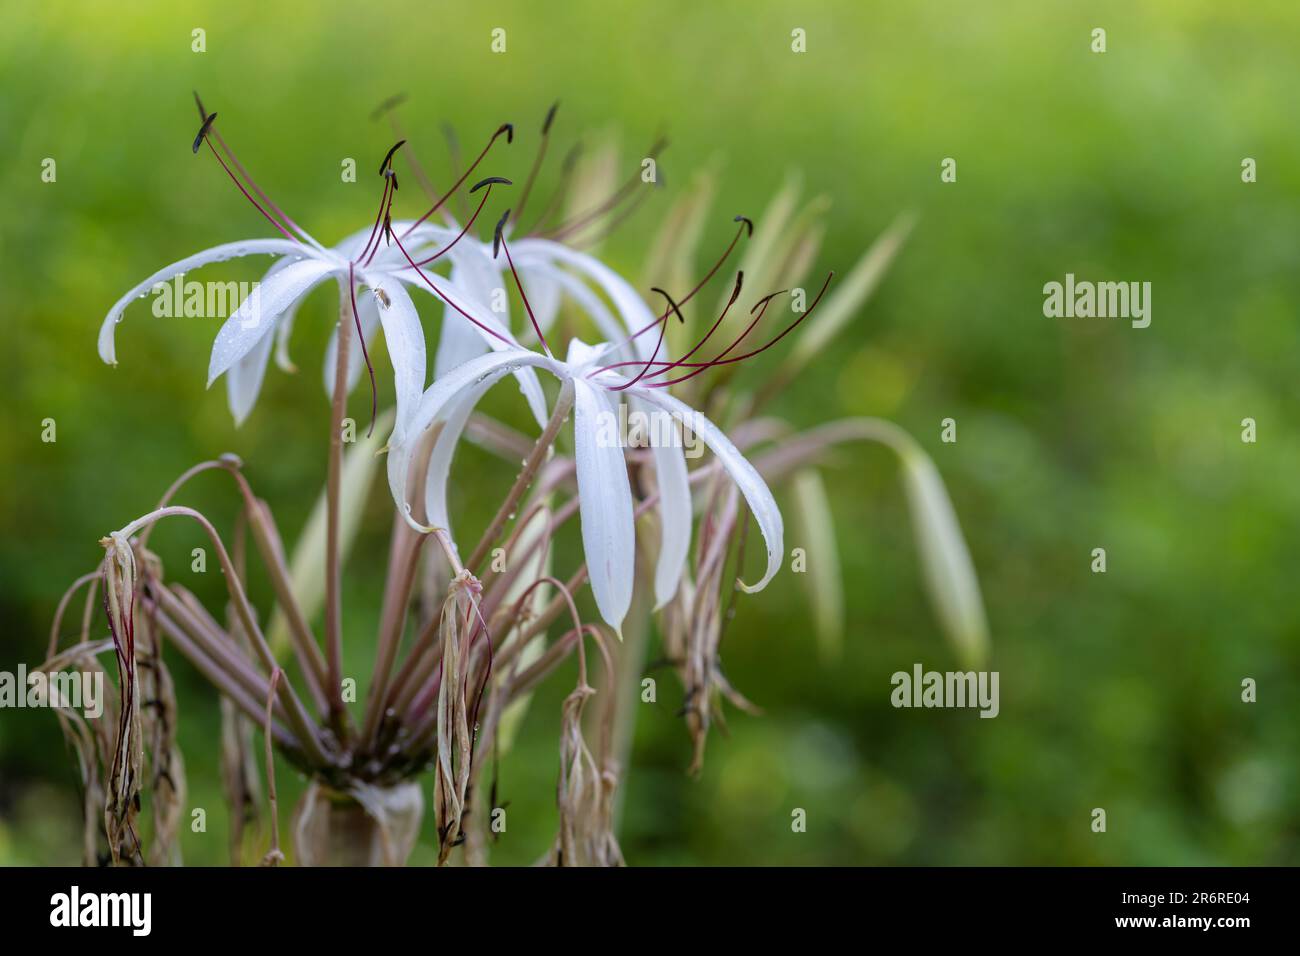 Closeup view of white and purple flowers and buds of crinum asiaticum aka poison bulb, giant crinum lily or spider lily blooming outdoors Stock Photo